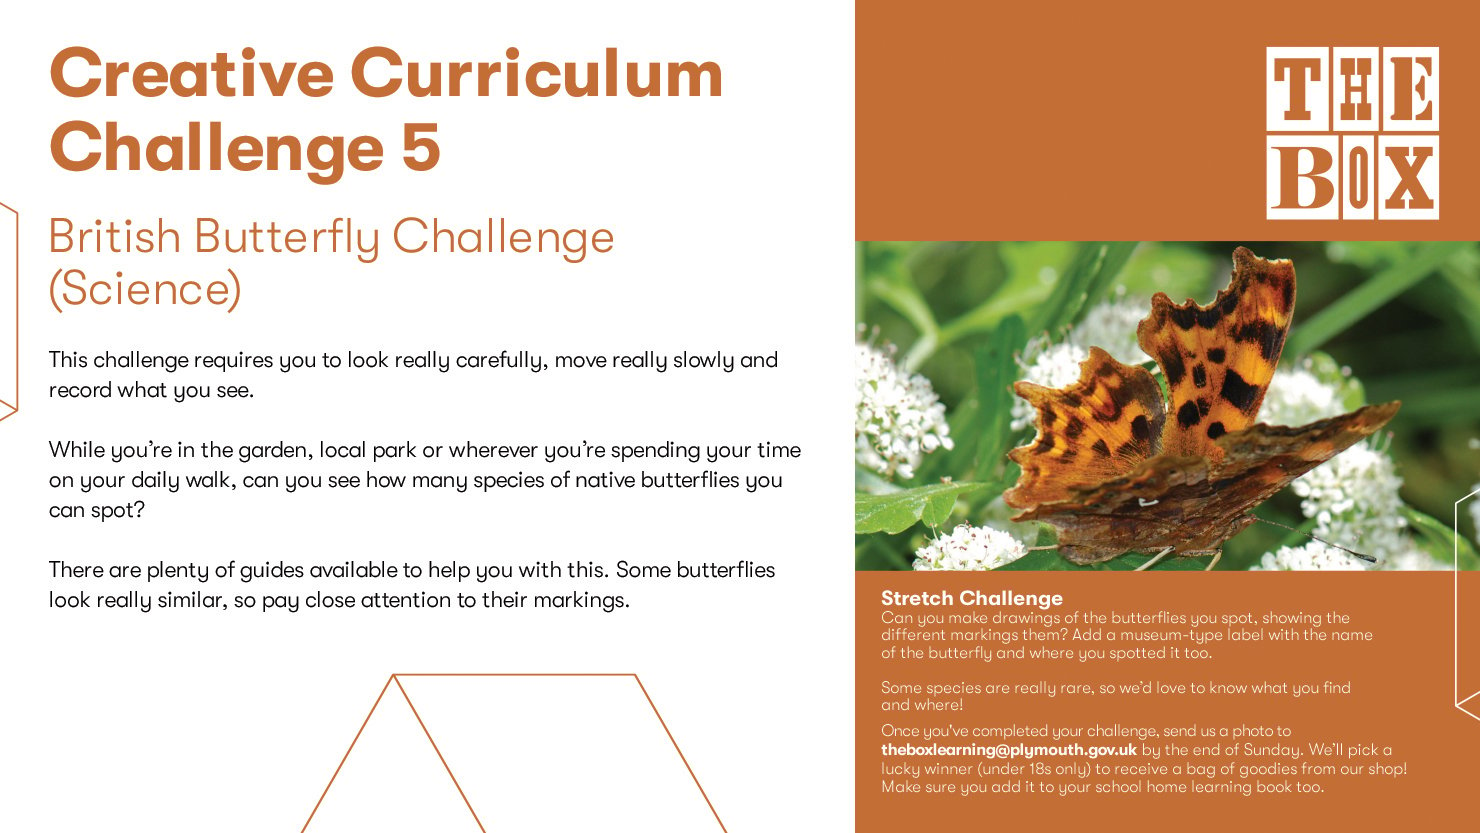 Graphic for The Box's Curriculum Challenge 5